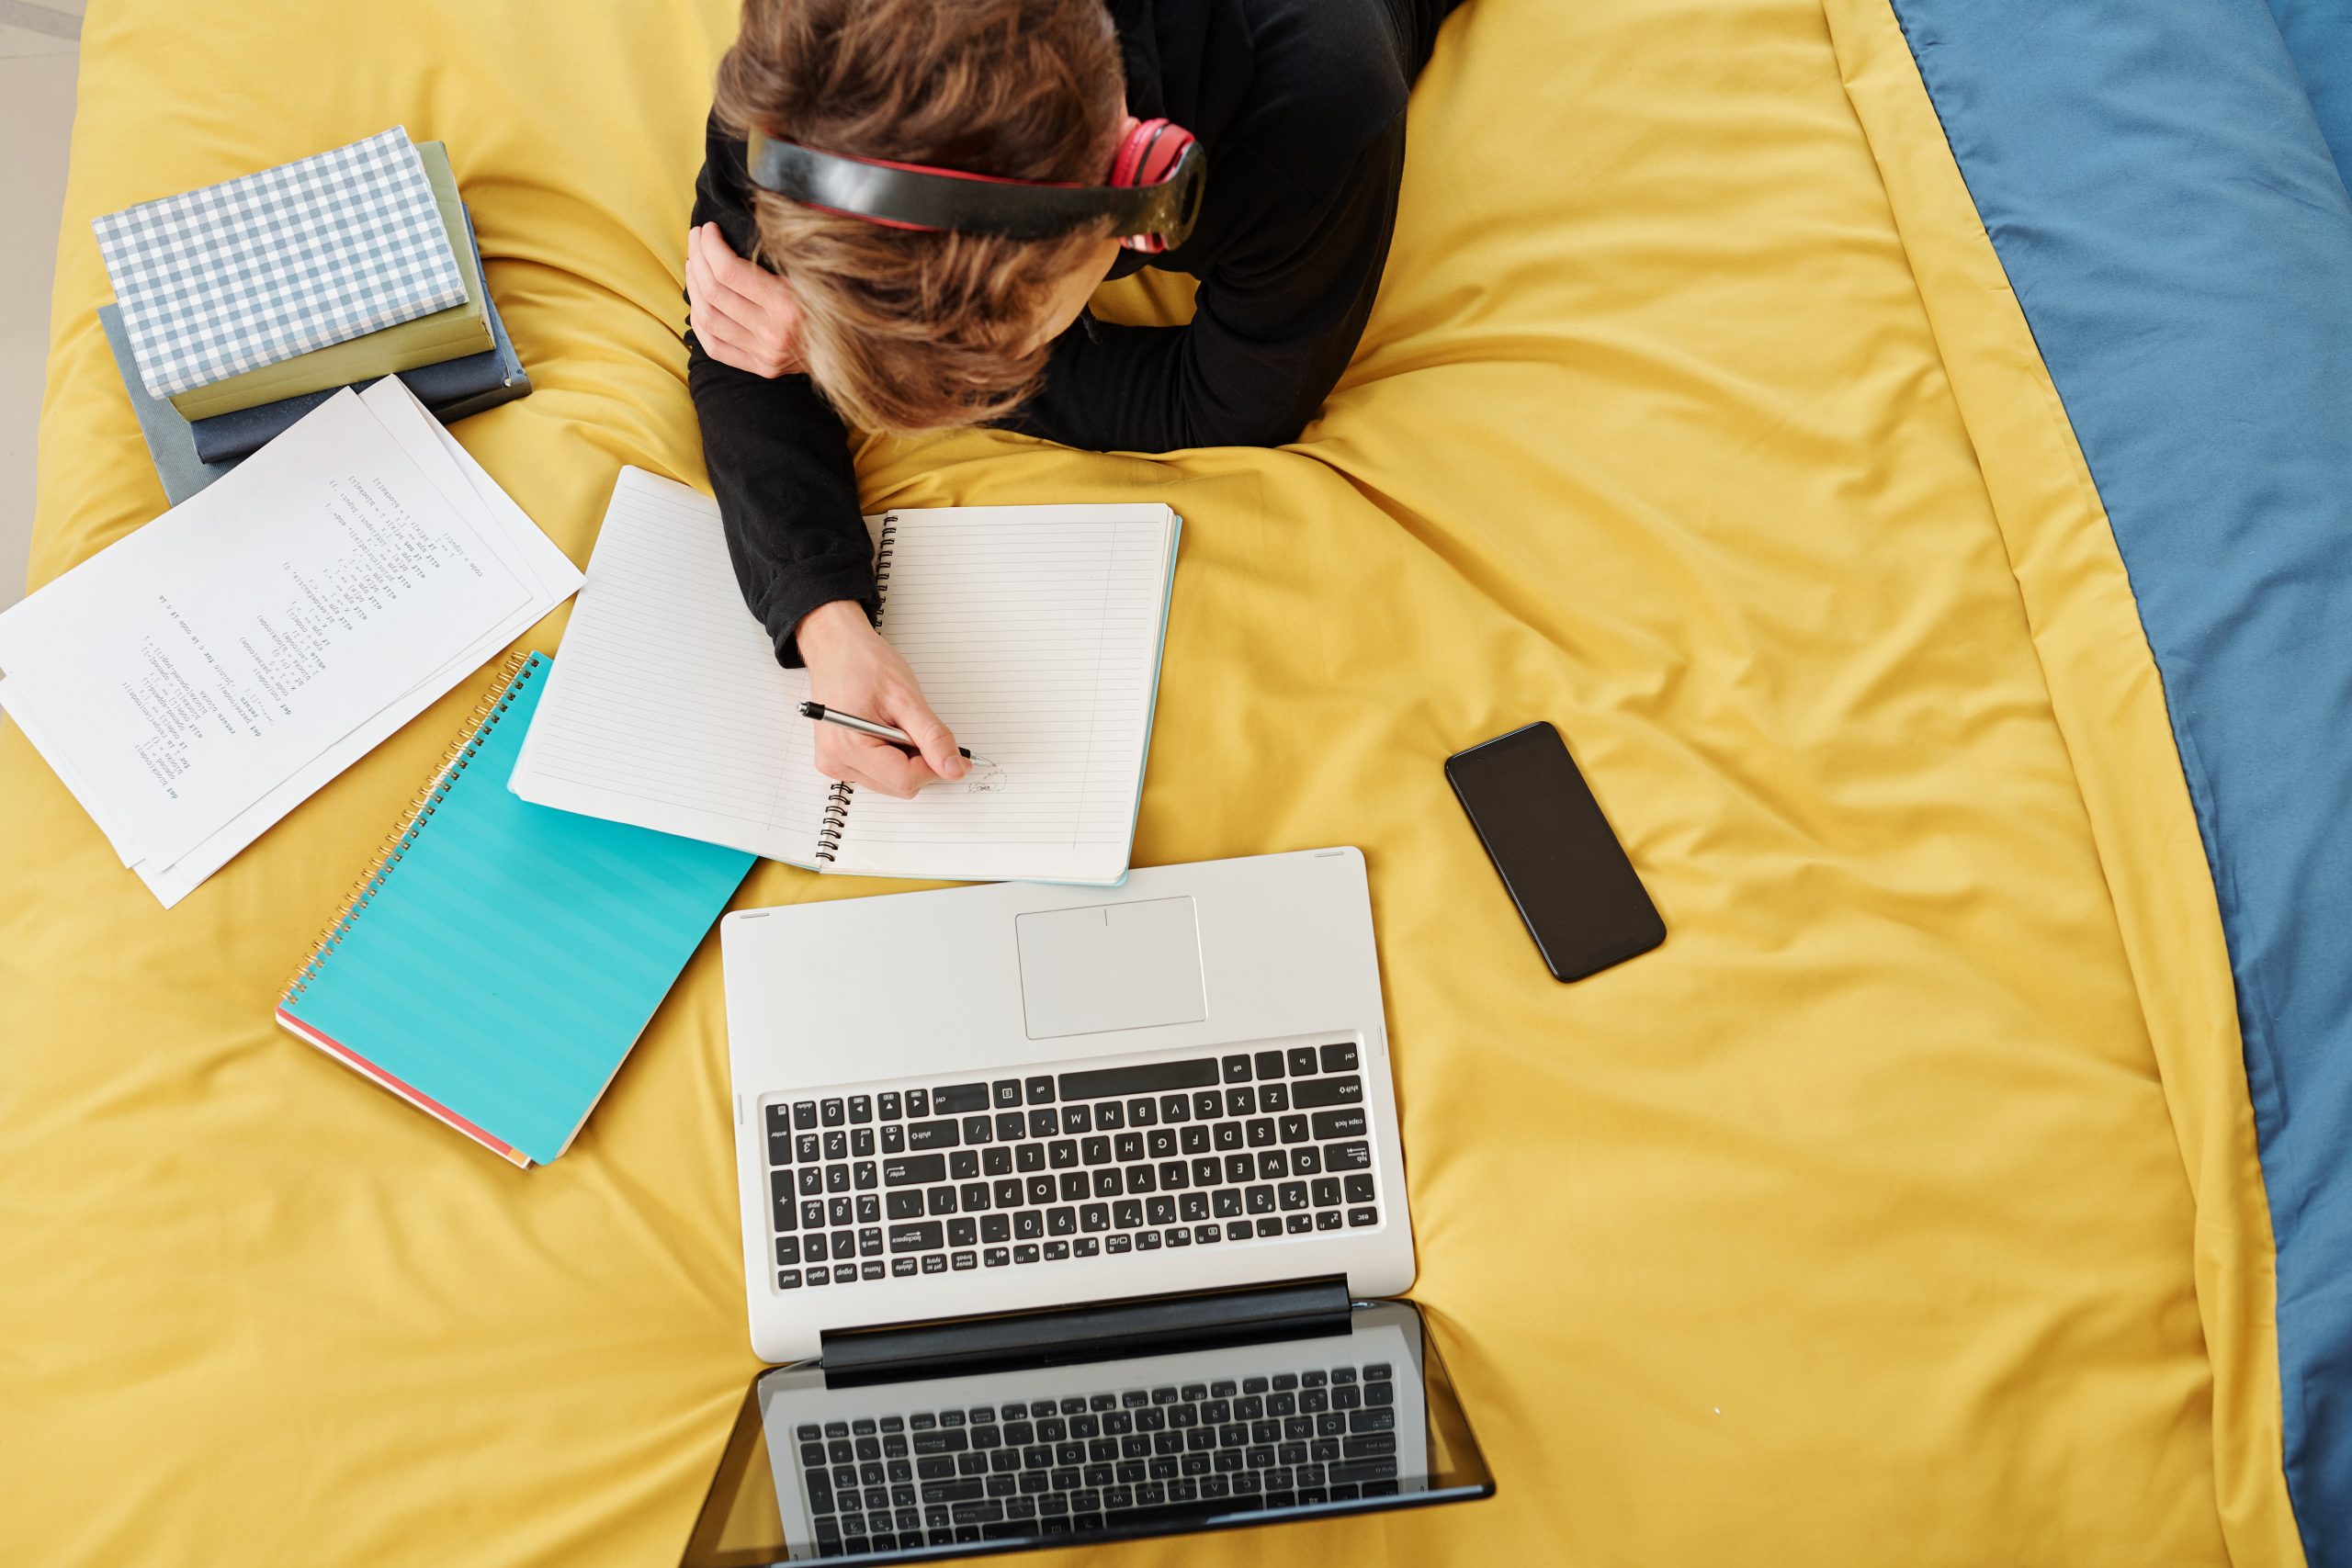 A student laying on a yellow blanket while drawing and writing in a notebook. There are an open computer, phone, and other notebooks around them.